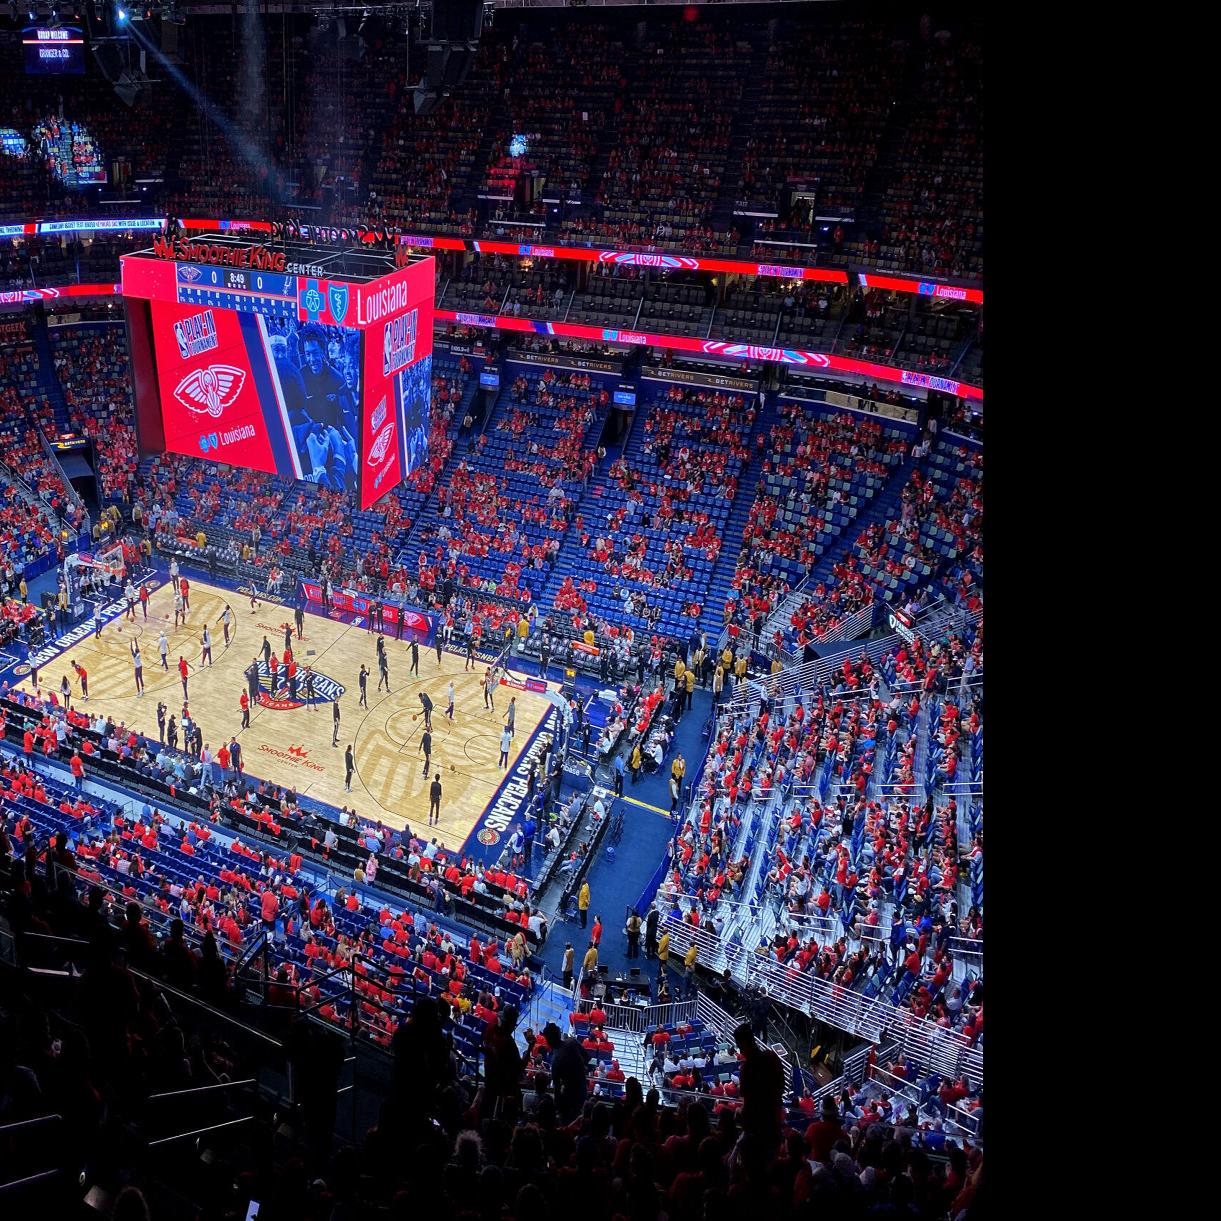 New Orleans Pelicans Smoothie King Center Stadium Poster Print 